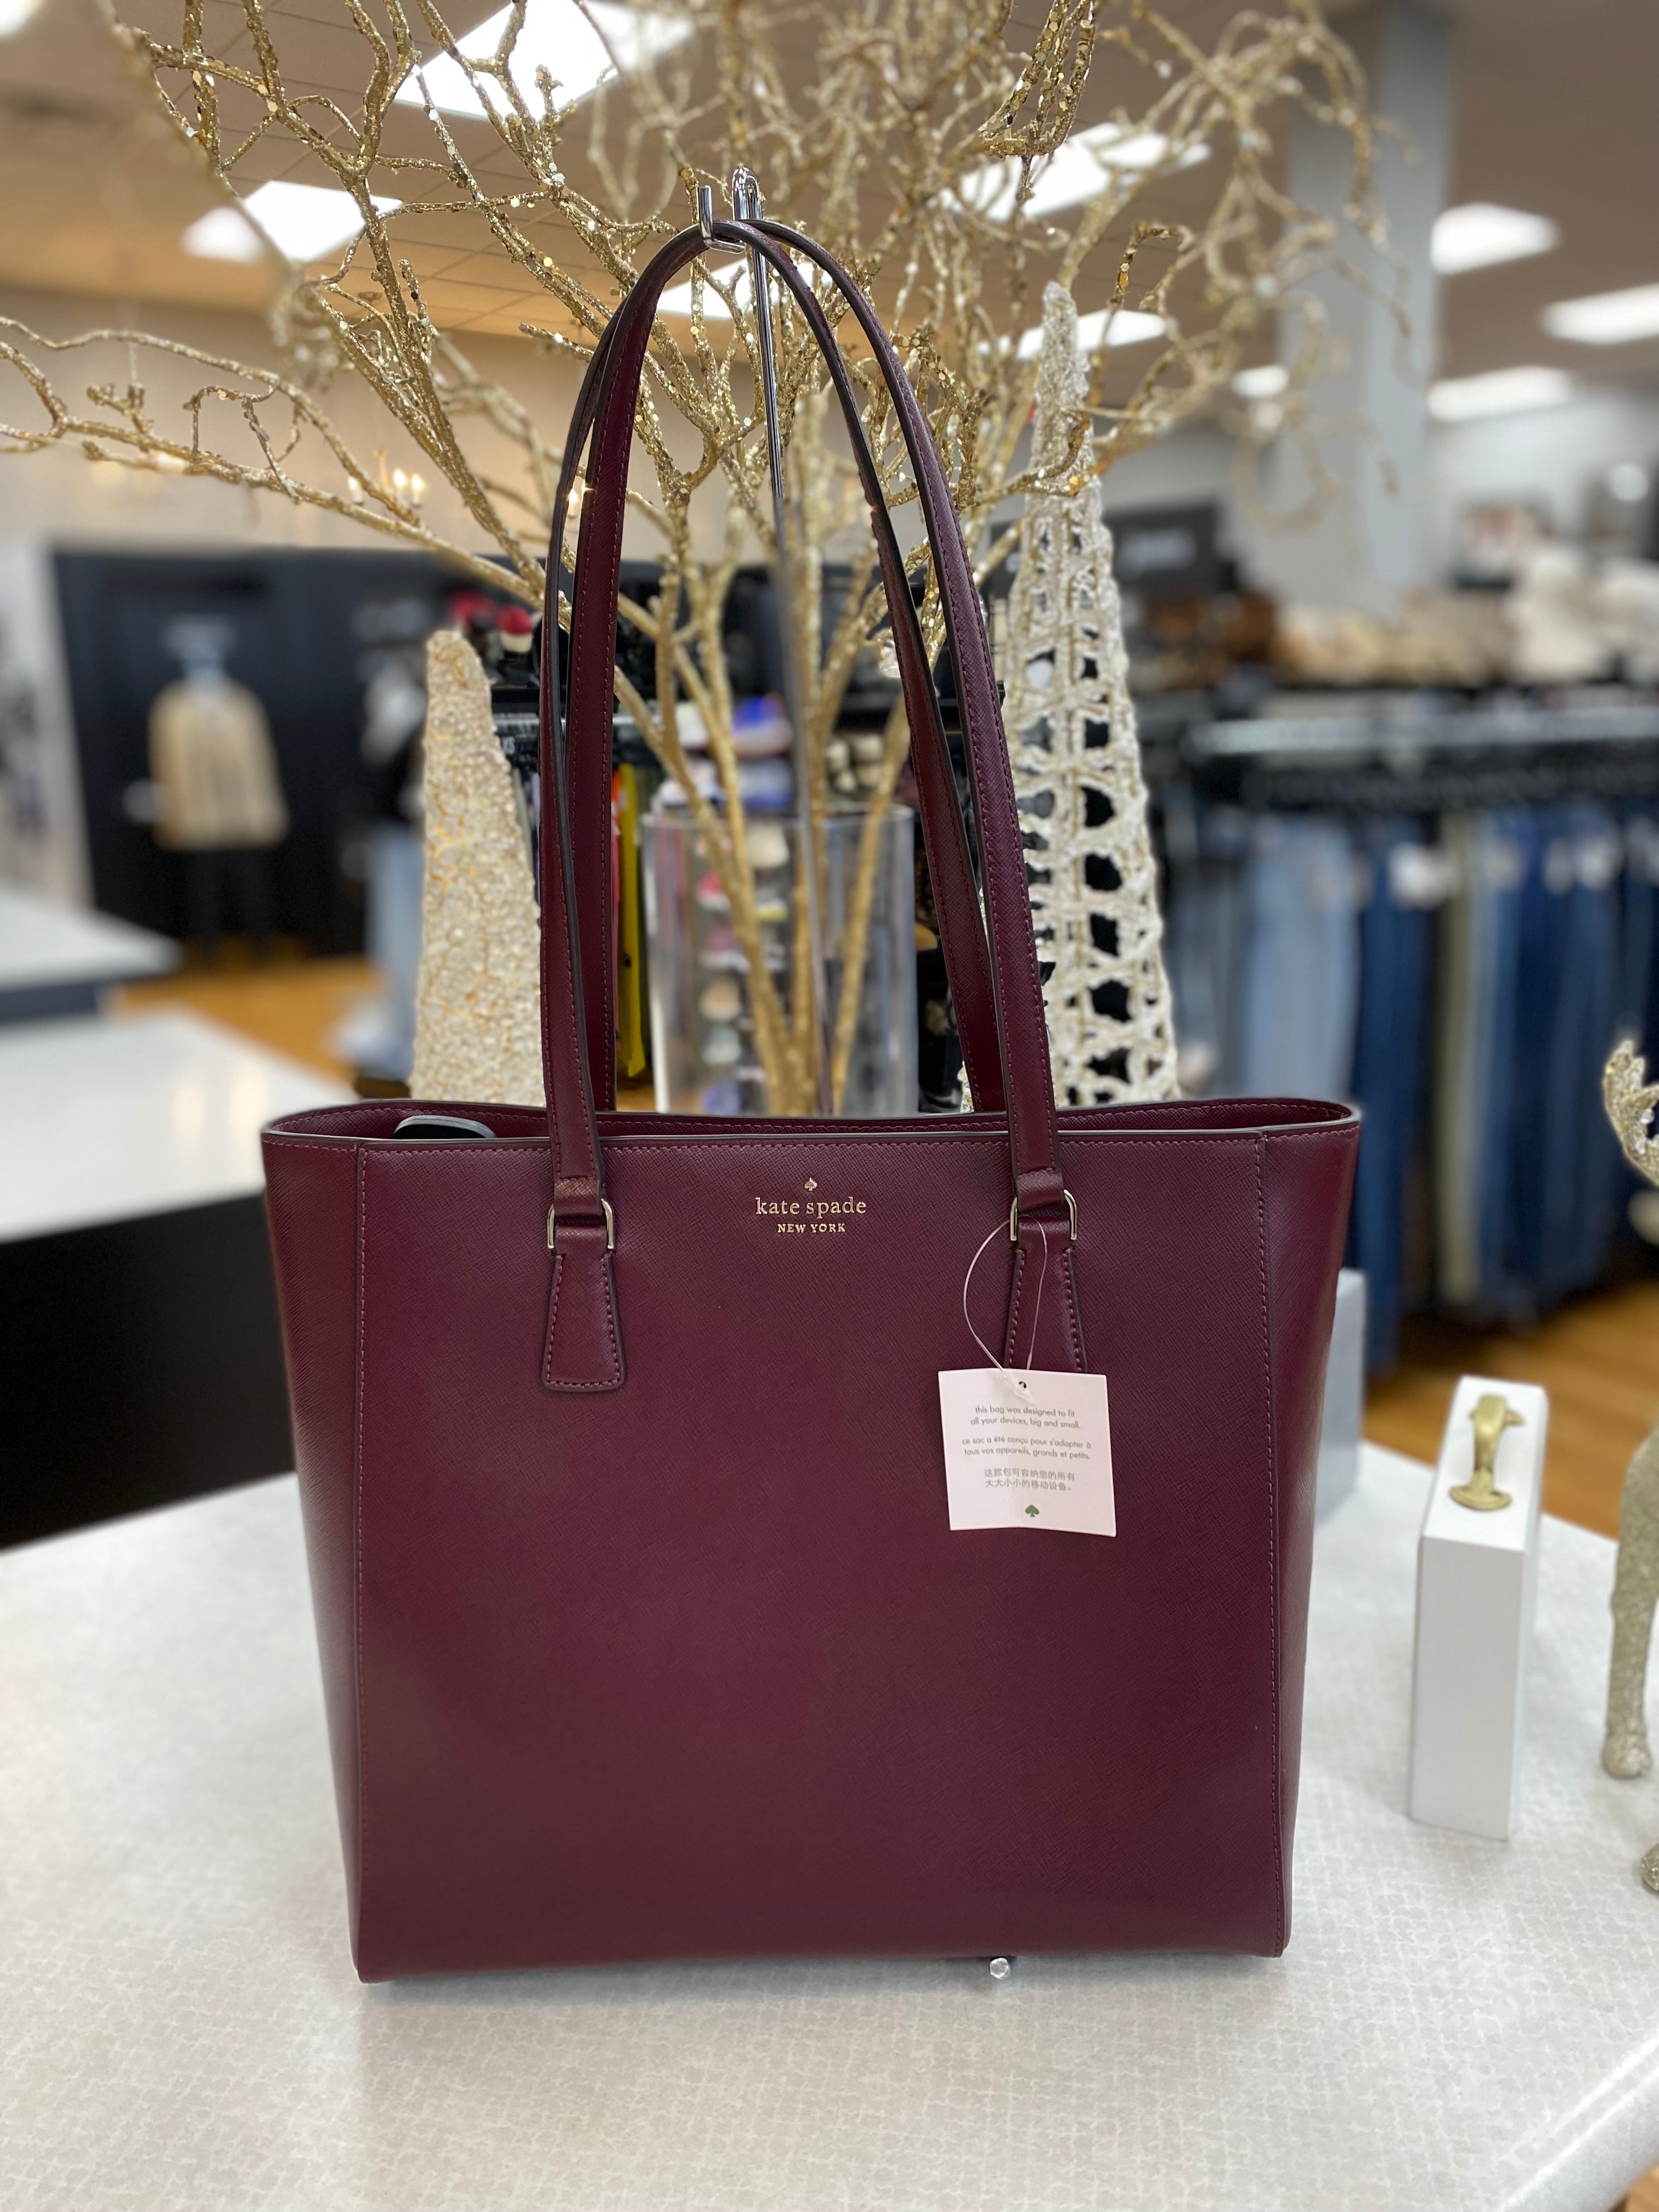 KATE SPADE #41393 Maroon Leather Shoulder Bag with Strap – ALL YOUR BLISS